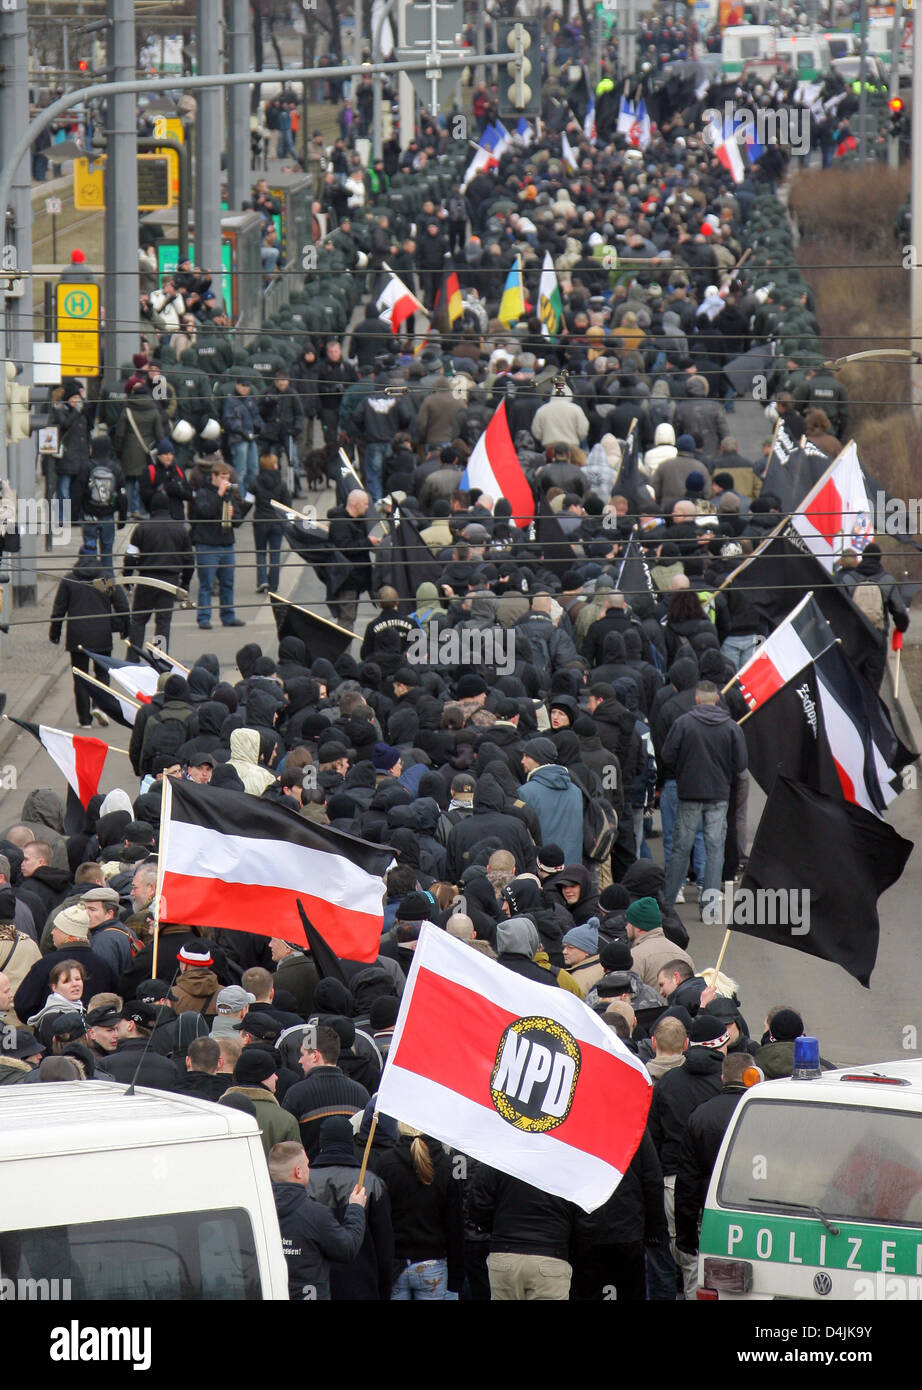 Rightist extremists march through Dresden, Germany, 14 February 2009. Far-right wing demonstrators traditionally provoke witha march  at the commemorations for the vicitims of the 1945 Dresden bombings. The date marks the 64th anniversary of the vast bombings on Dresden  conducted by allied forces to the end of World War II in 1945. Approximately 25,000 people died in the fires. Ph Stock Photo